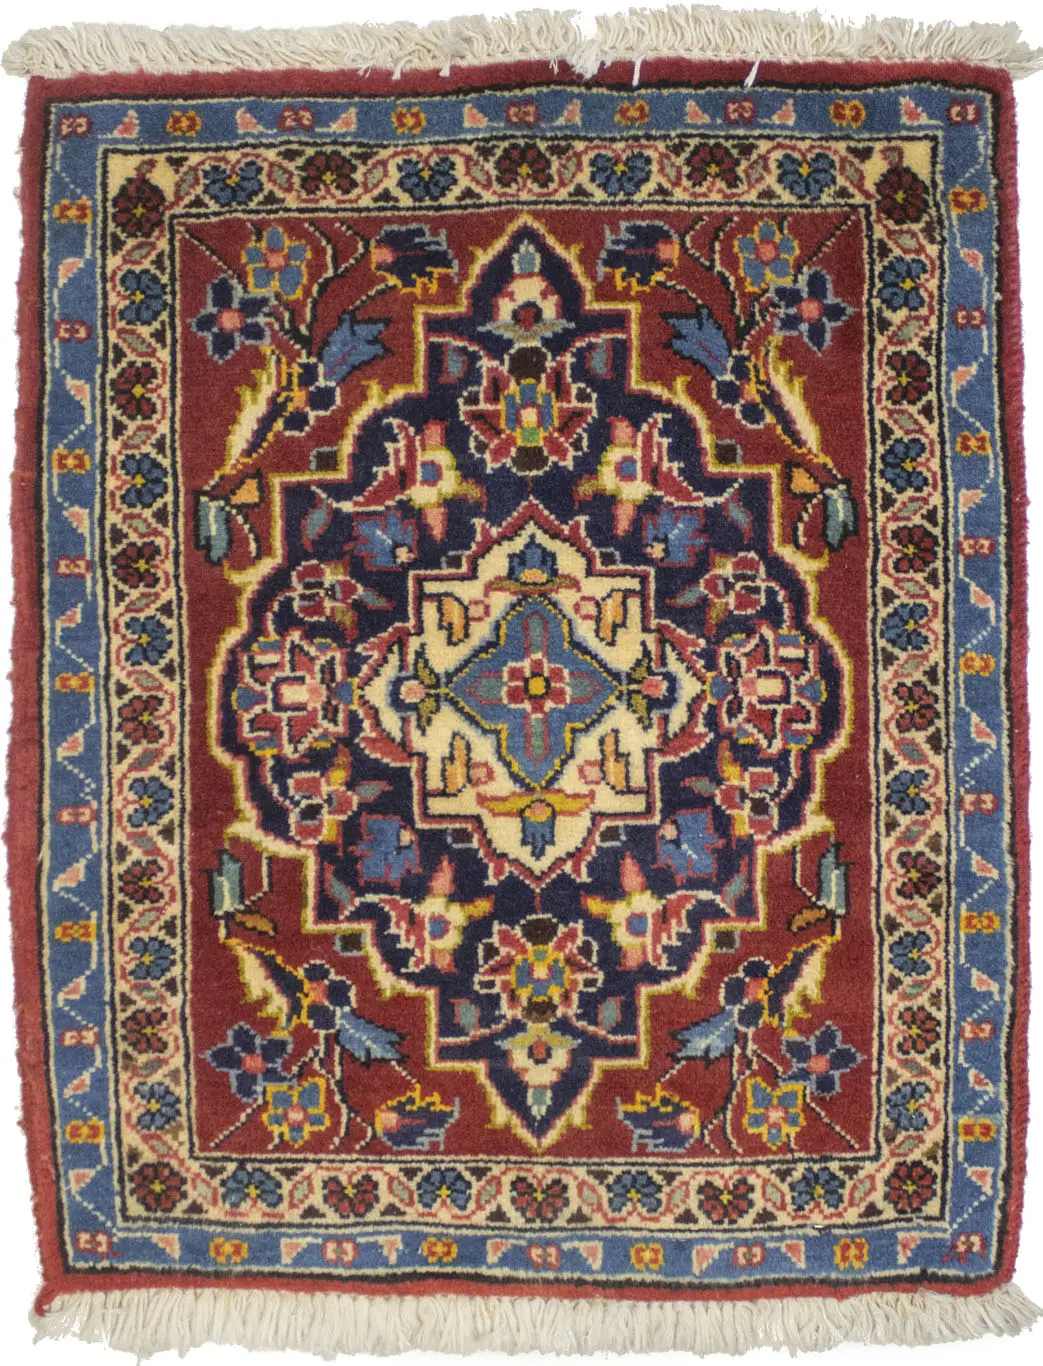 CLEARANCE Antique Floral Kashan Persian Area Rug Handmade Wool